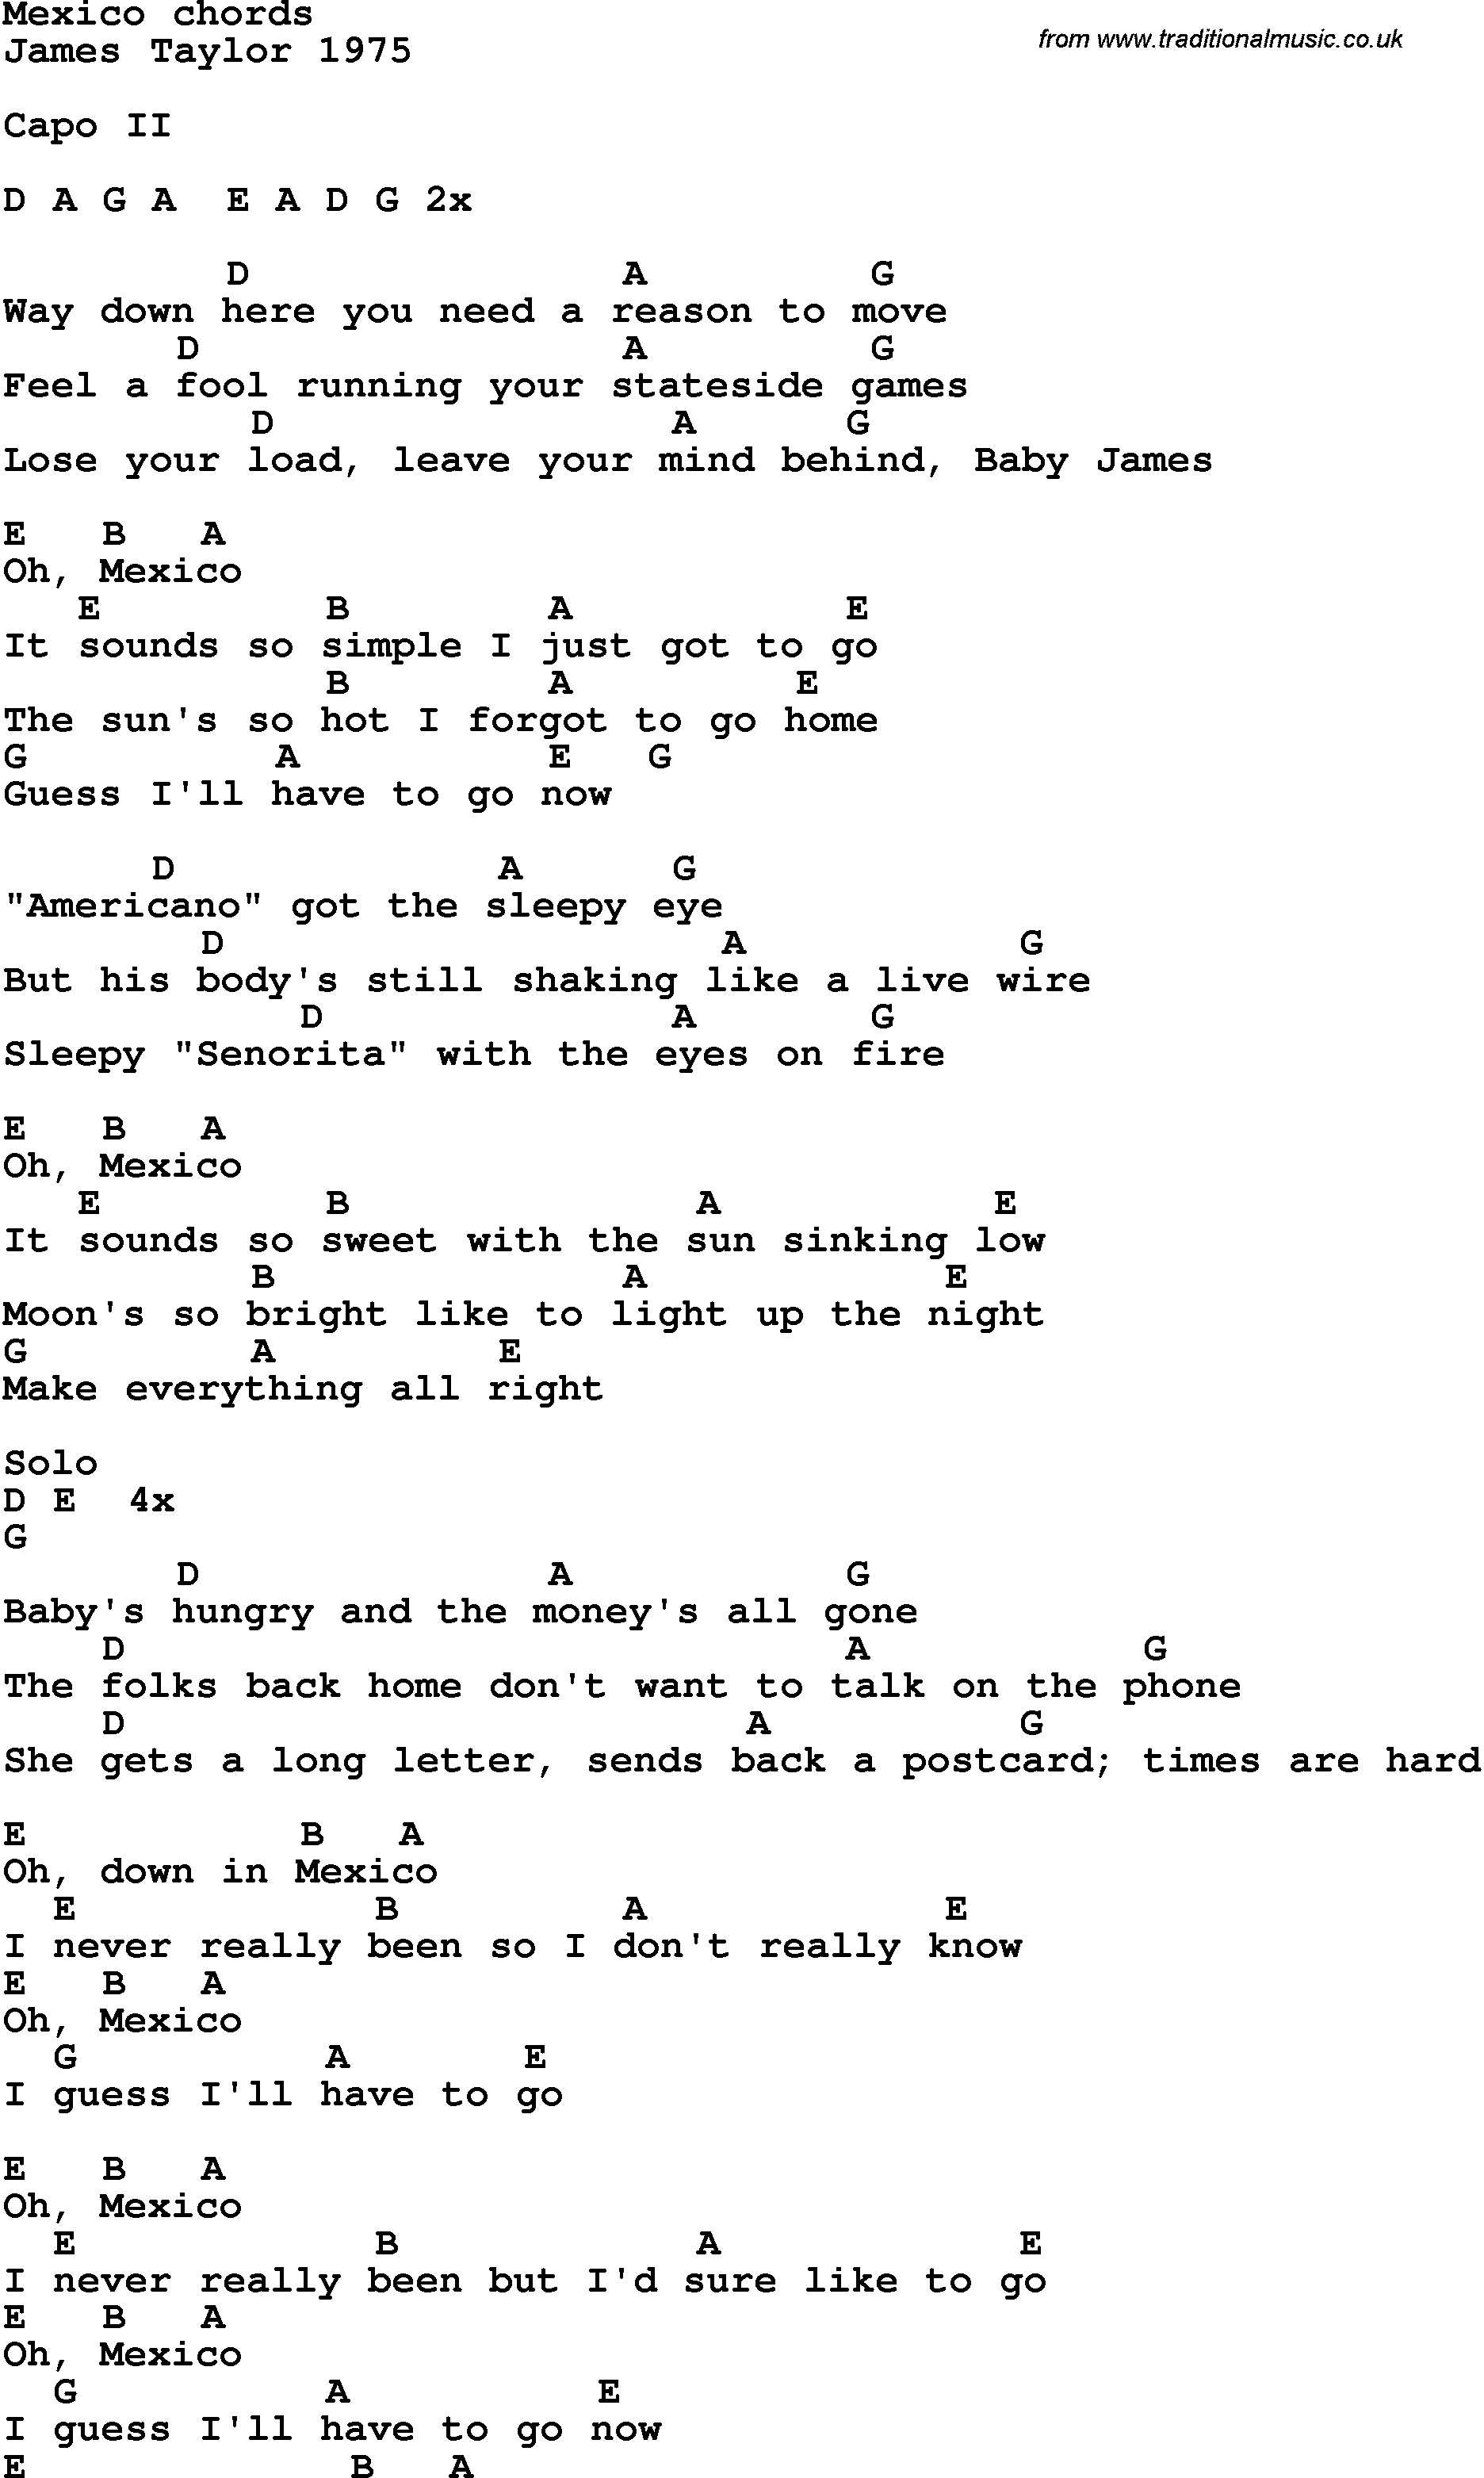 Song Lyrics with guitar chords for Mexico